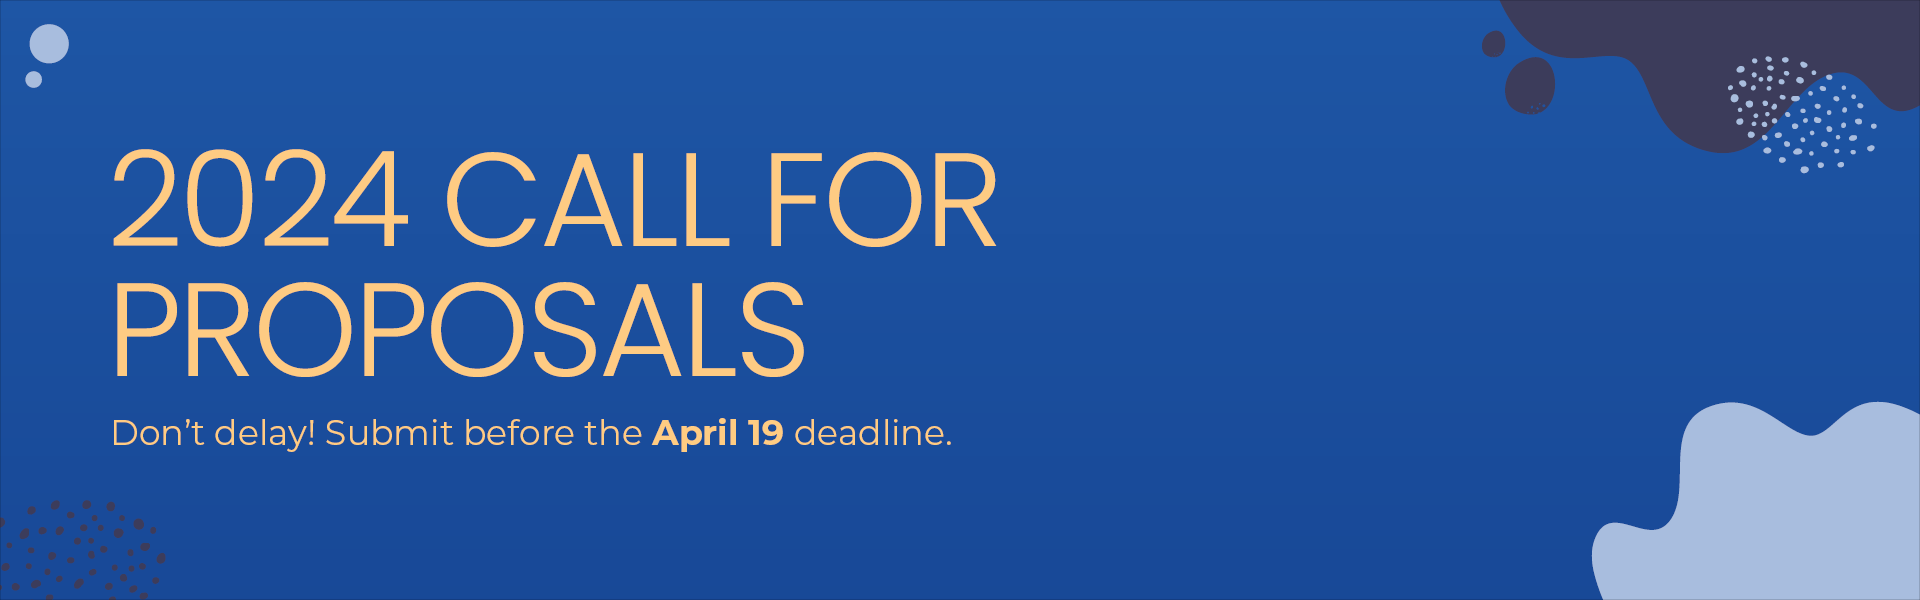 2024 Call for Proposals Banner